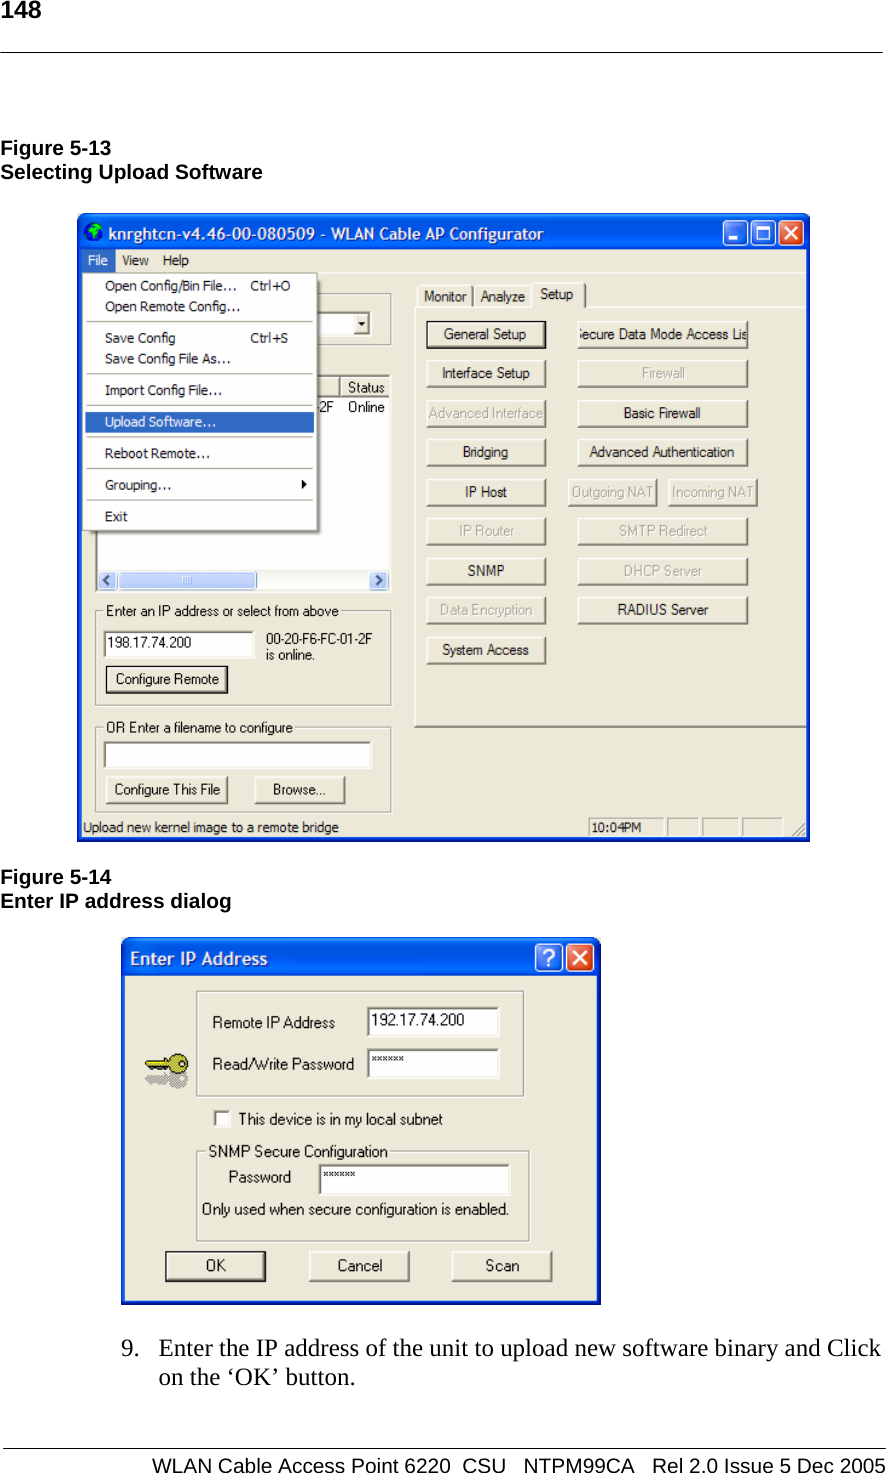   148    WLAN Cable Access Point 6220  CSU   NTPM99CA   Rel 2.0 Issue 5 Dec 2005  Figure 5-13 Selecting Upload Software     Figure 5-14 Enter IP address dialog    9. Enter the IP address of the unit to upload new software binary and Click on the ‘OK’ button.   